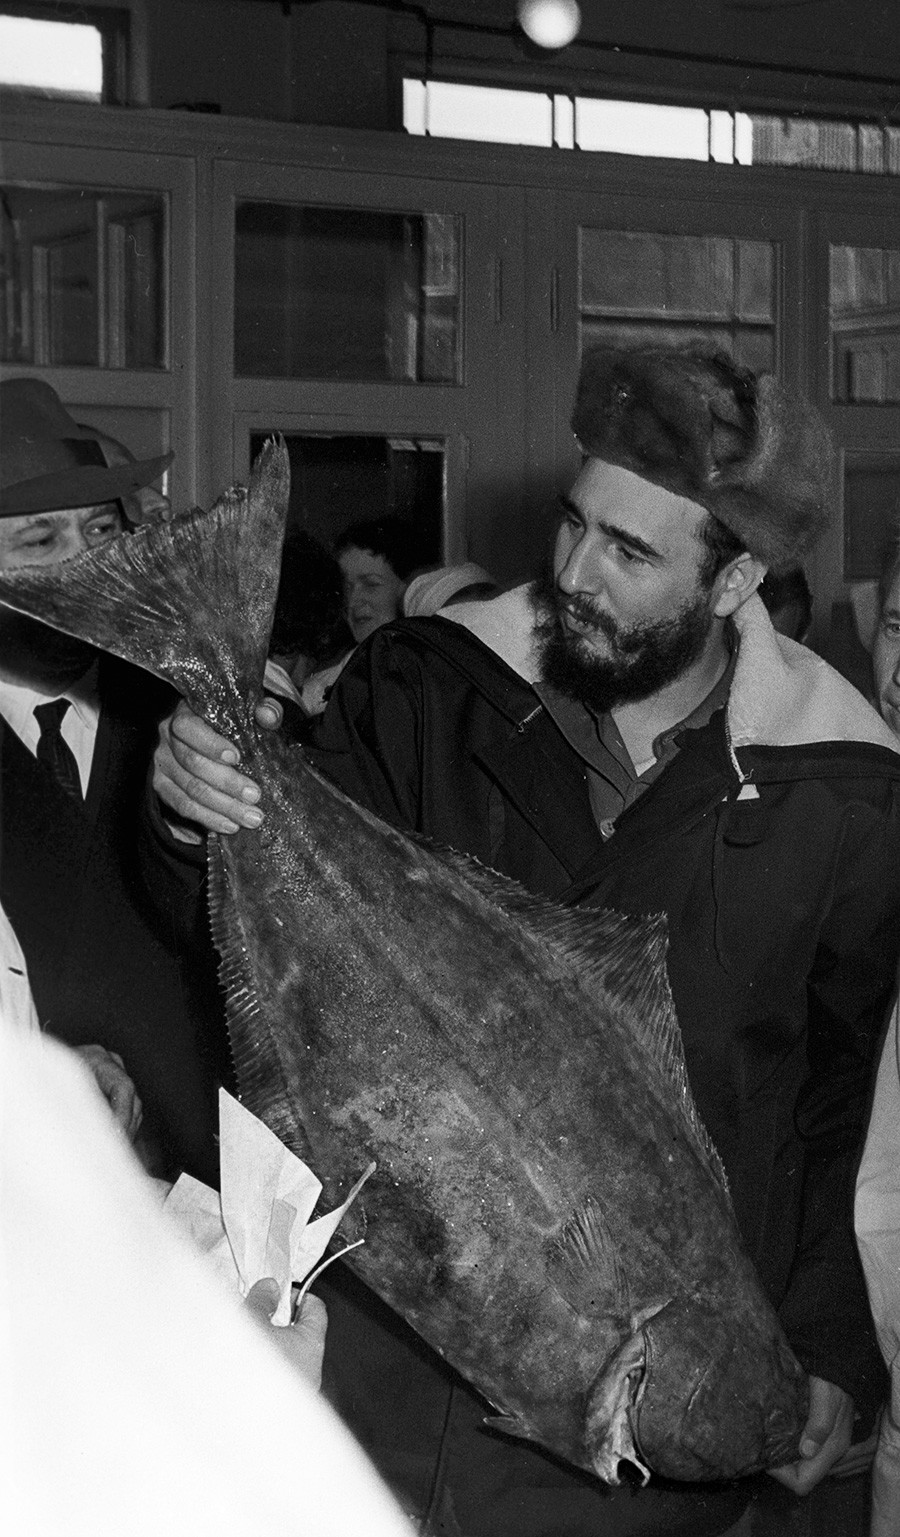 Chairman of the State Council and Council of Ministers of the Republic of Cuba, leader of the Cuban revolution Fidel Castro visits a fish factory in Murmansk, USSR